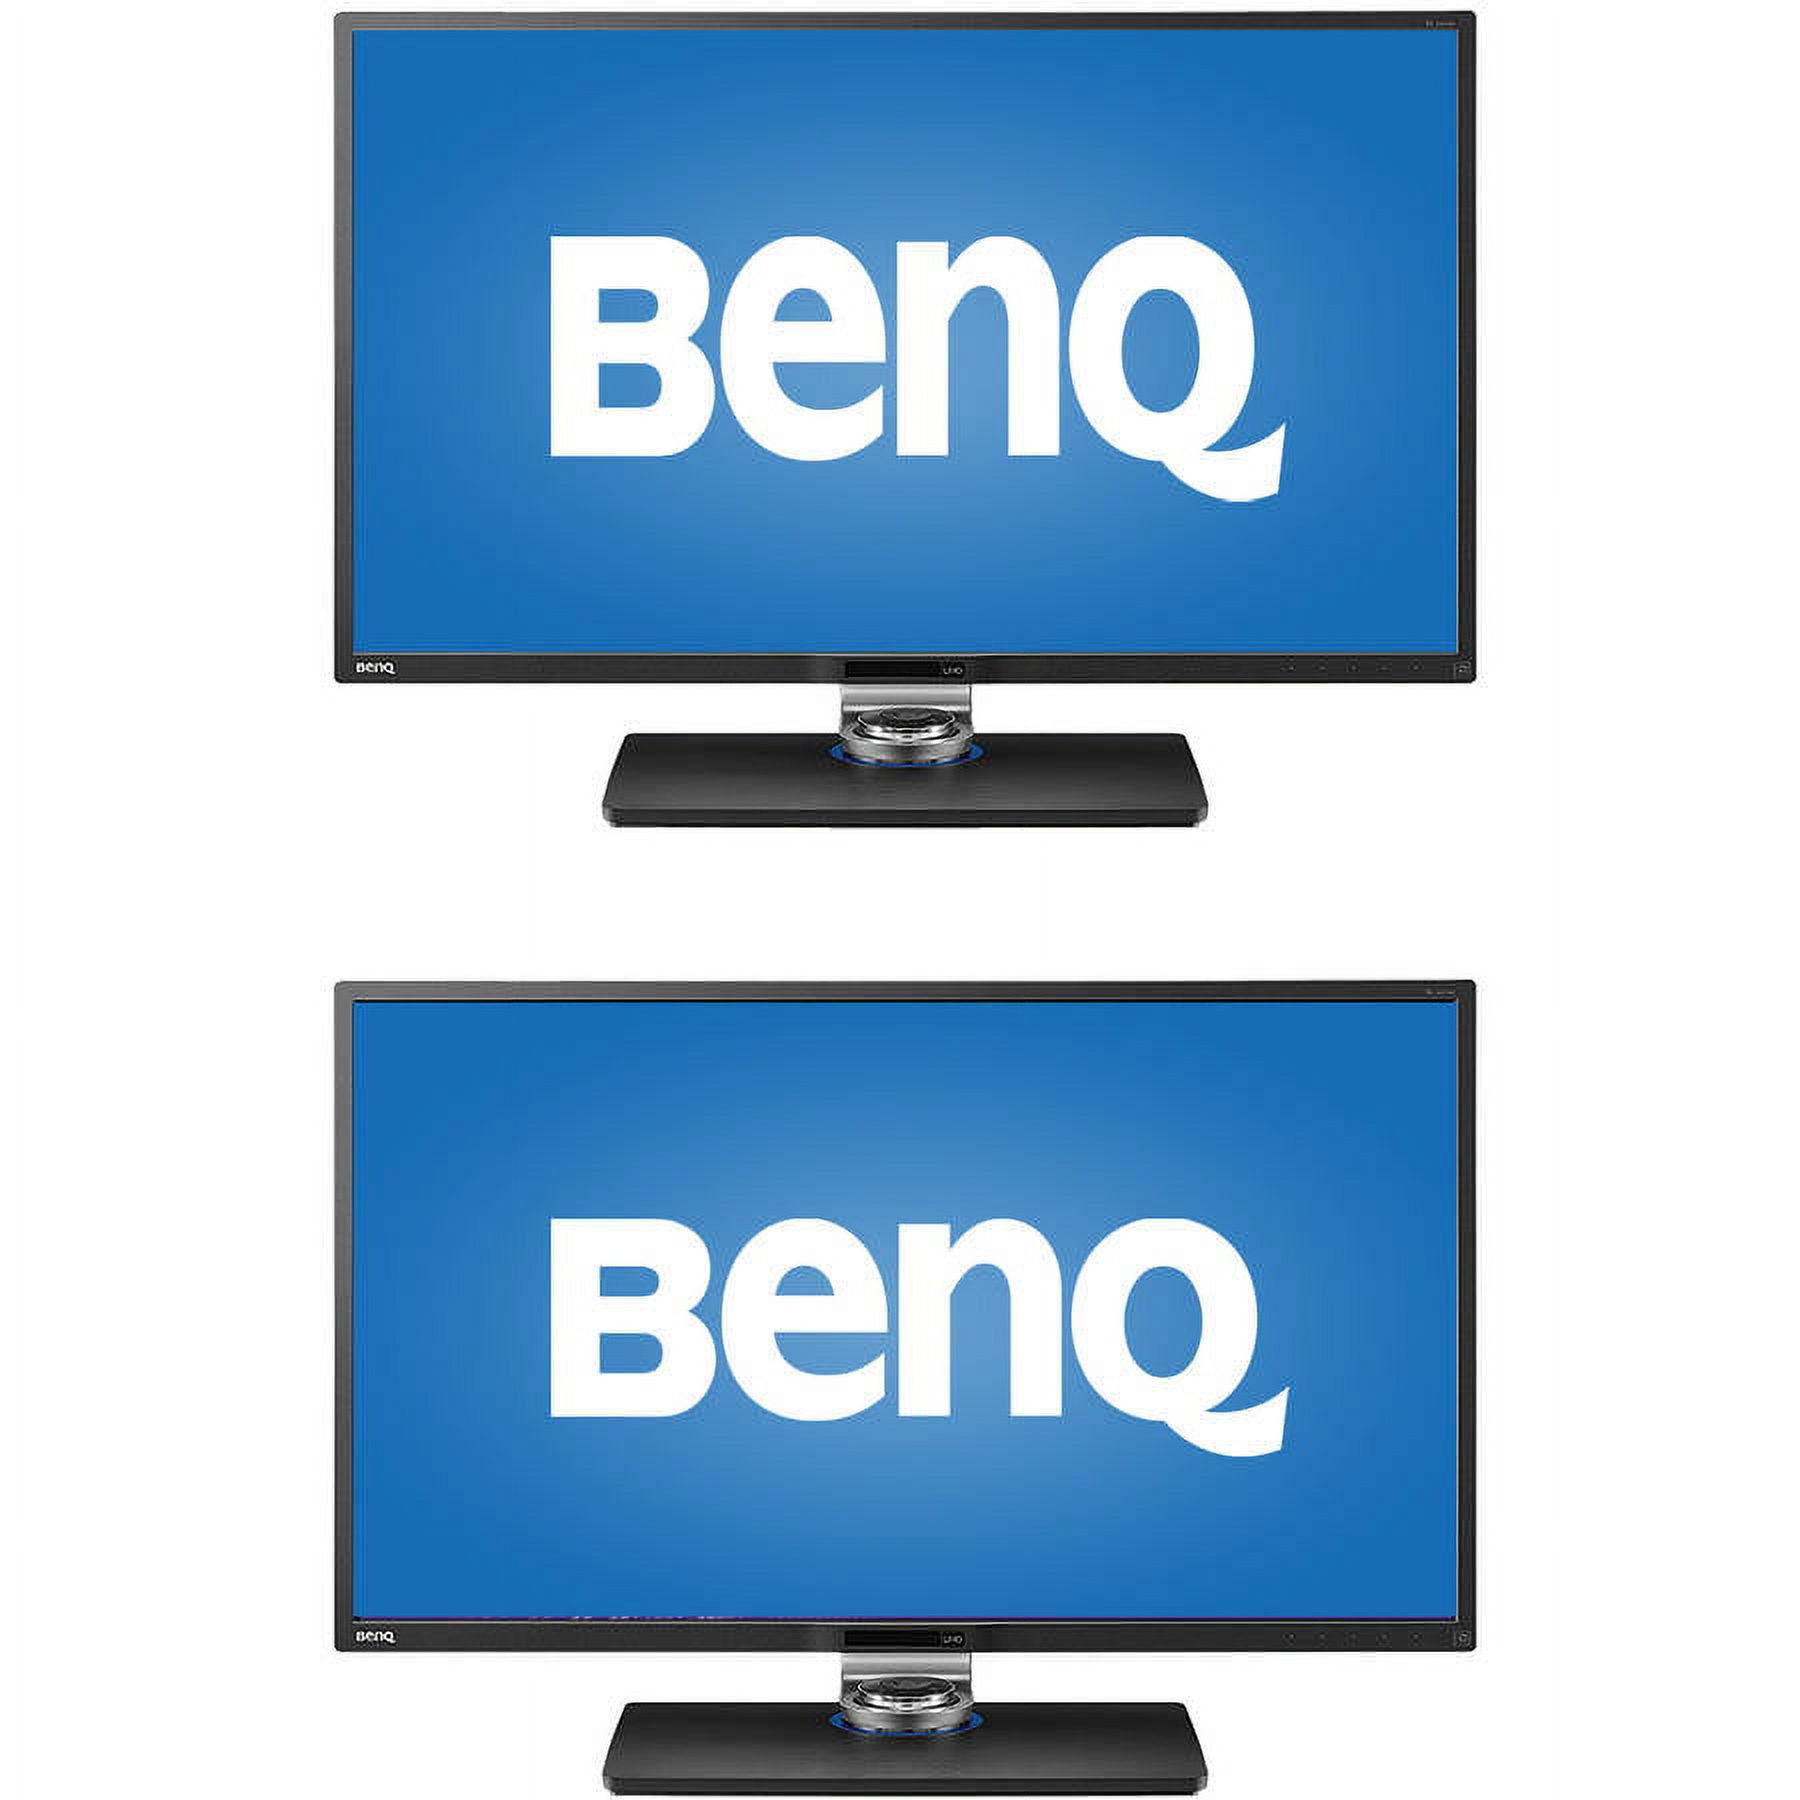 BenQ 32" LED Widescreen CAD/CAM 4K Monitor (BL3201PH Black), 2-Pack - image 1 of 1